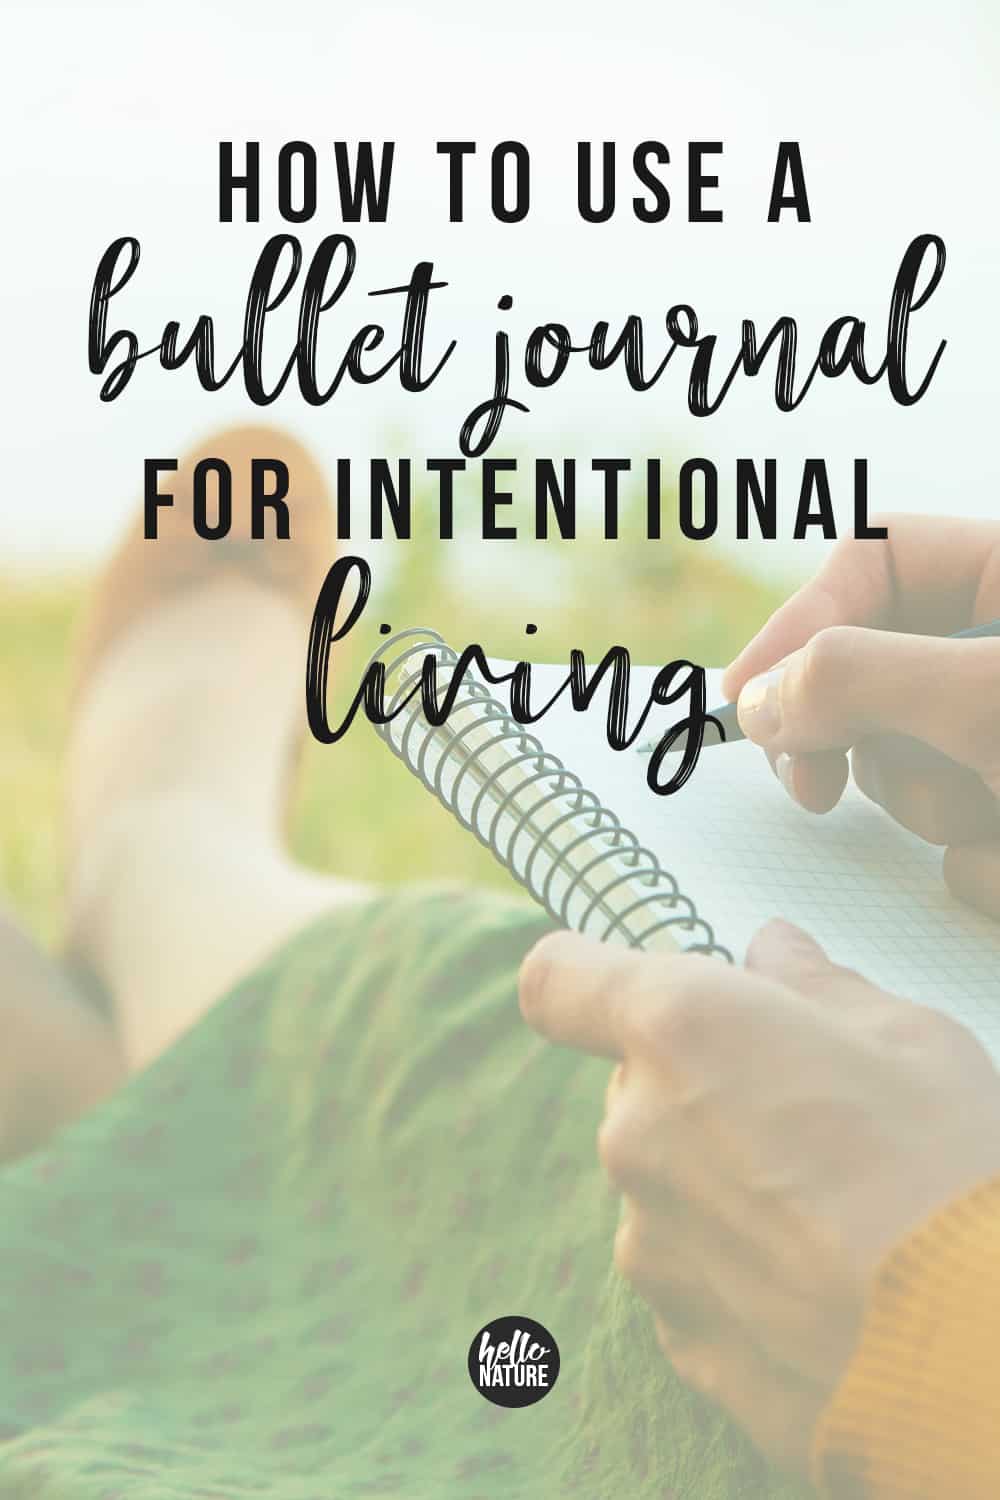 In need of creative Bullet Journal ideas? Try using your BUJO as an intentional living journal! Find inspiration and ideas for mindfulness bullet journaling, figure out monthly spreads, and improve your goal setting. #IntentionalLiving #BulletJournal #BUJO #Journaling #GoalSetting #Mindfulness #Gratitude #Intentional